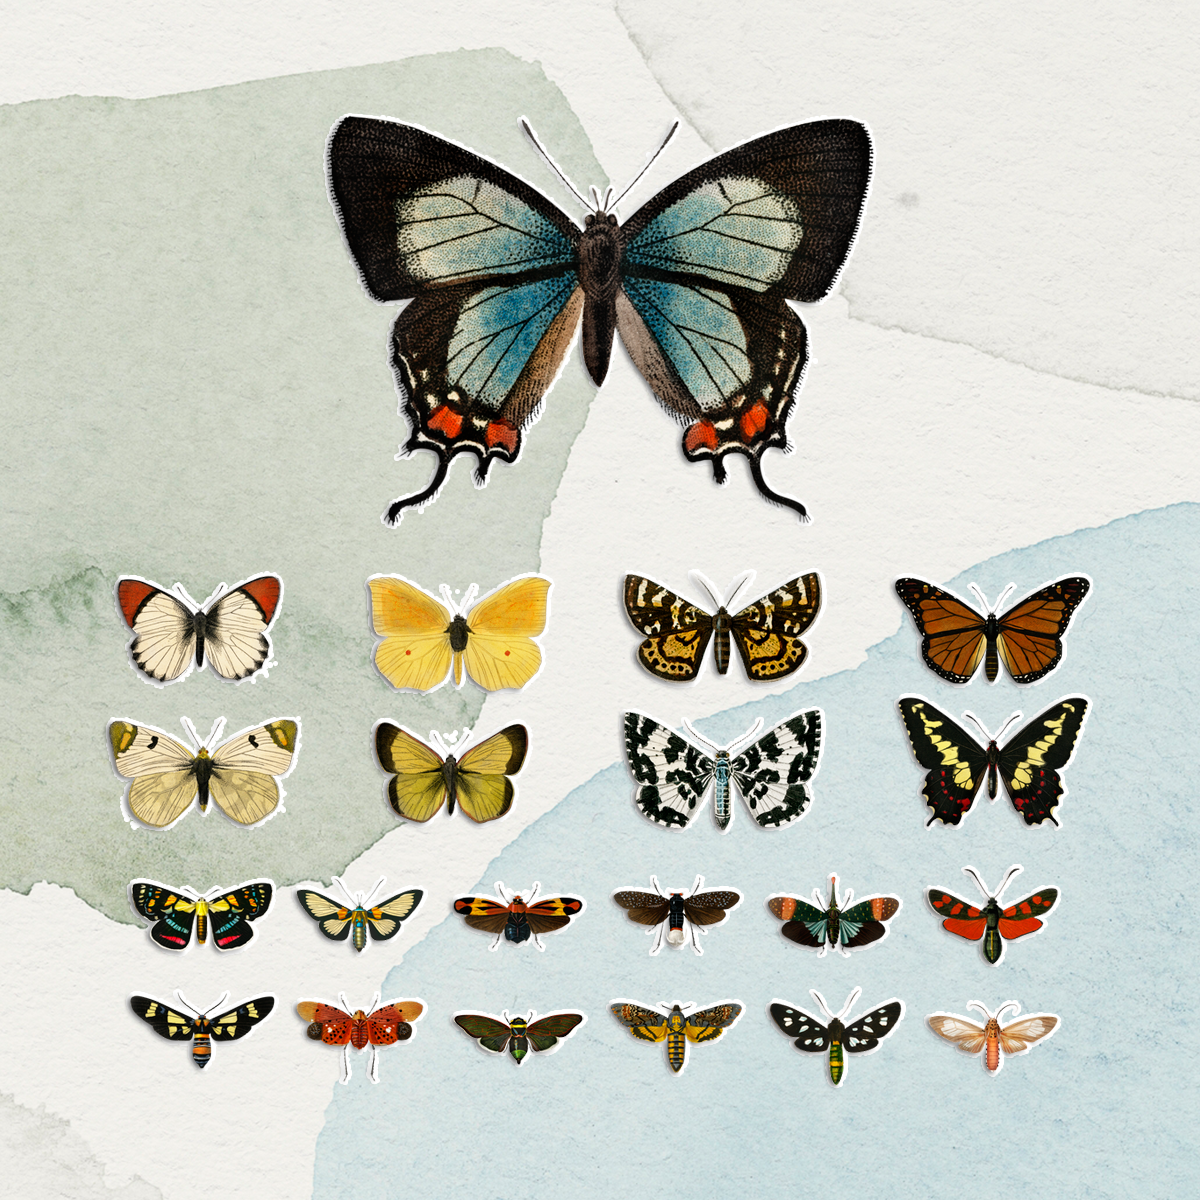 Sticker Art: Creative Ways To Showcase Your Favorite Stickers - Butterfly stickers 